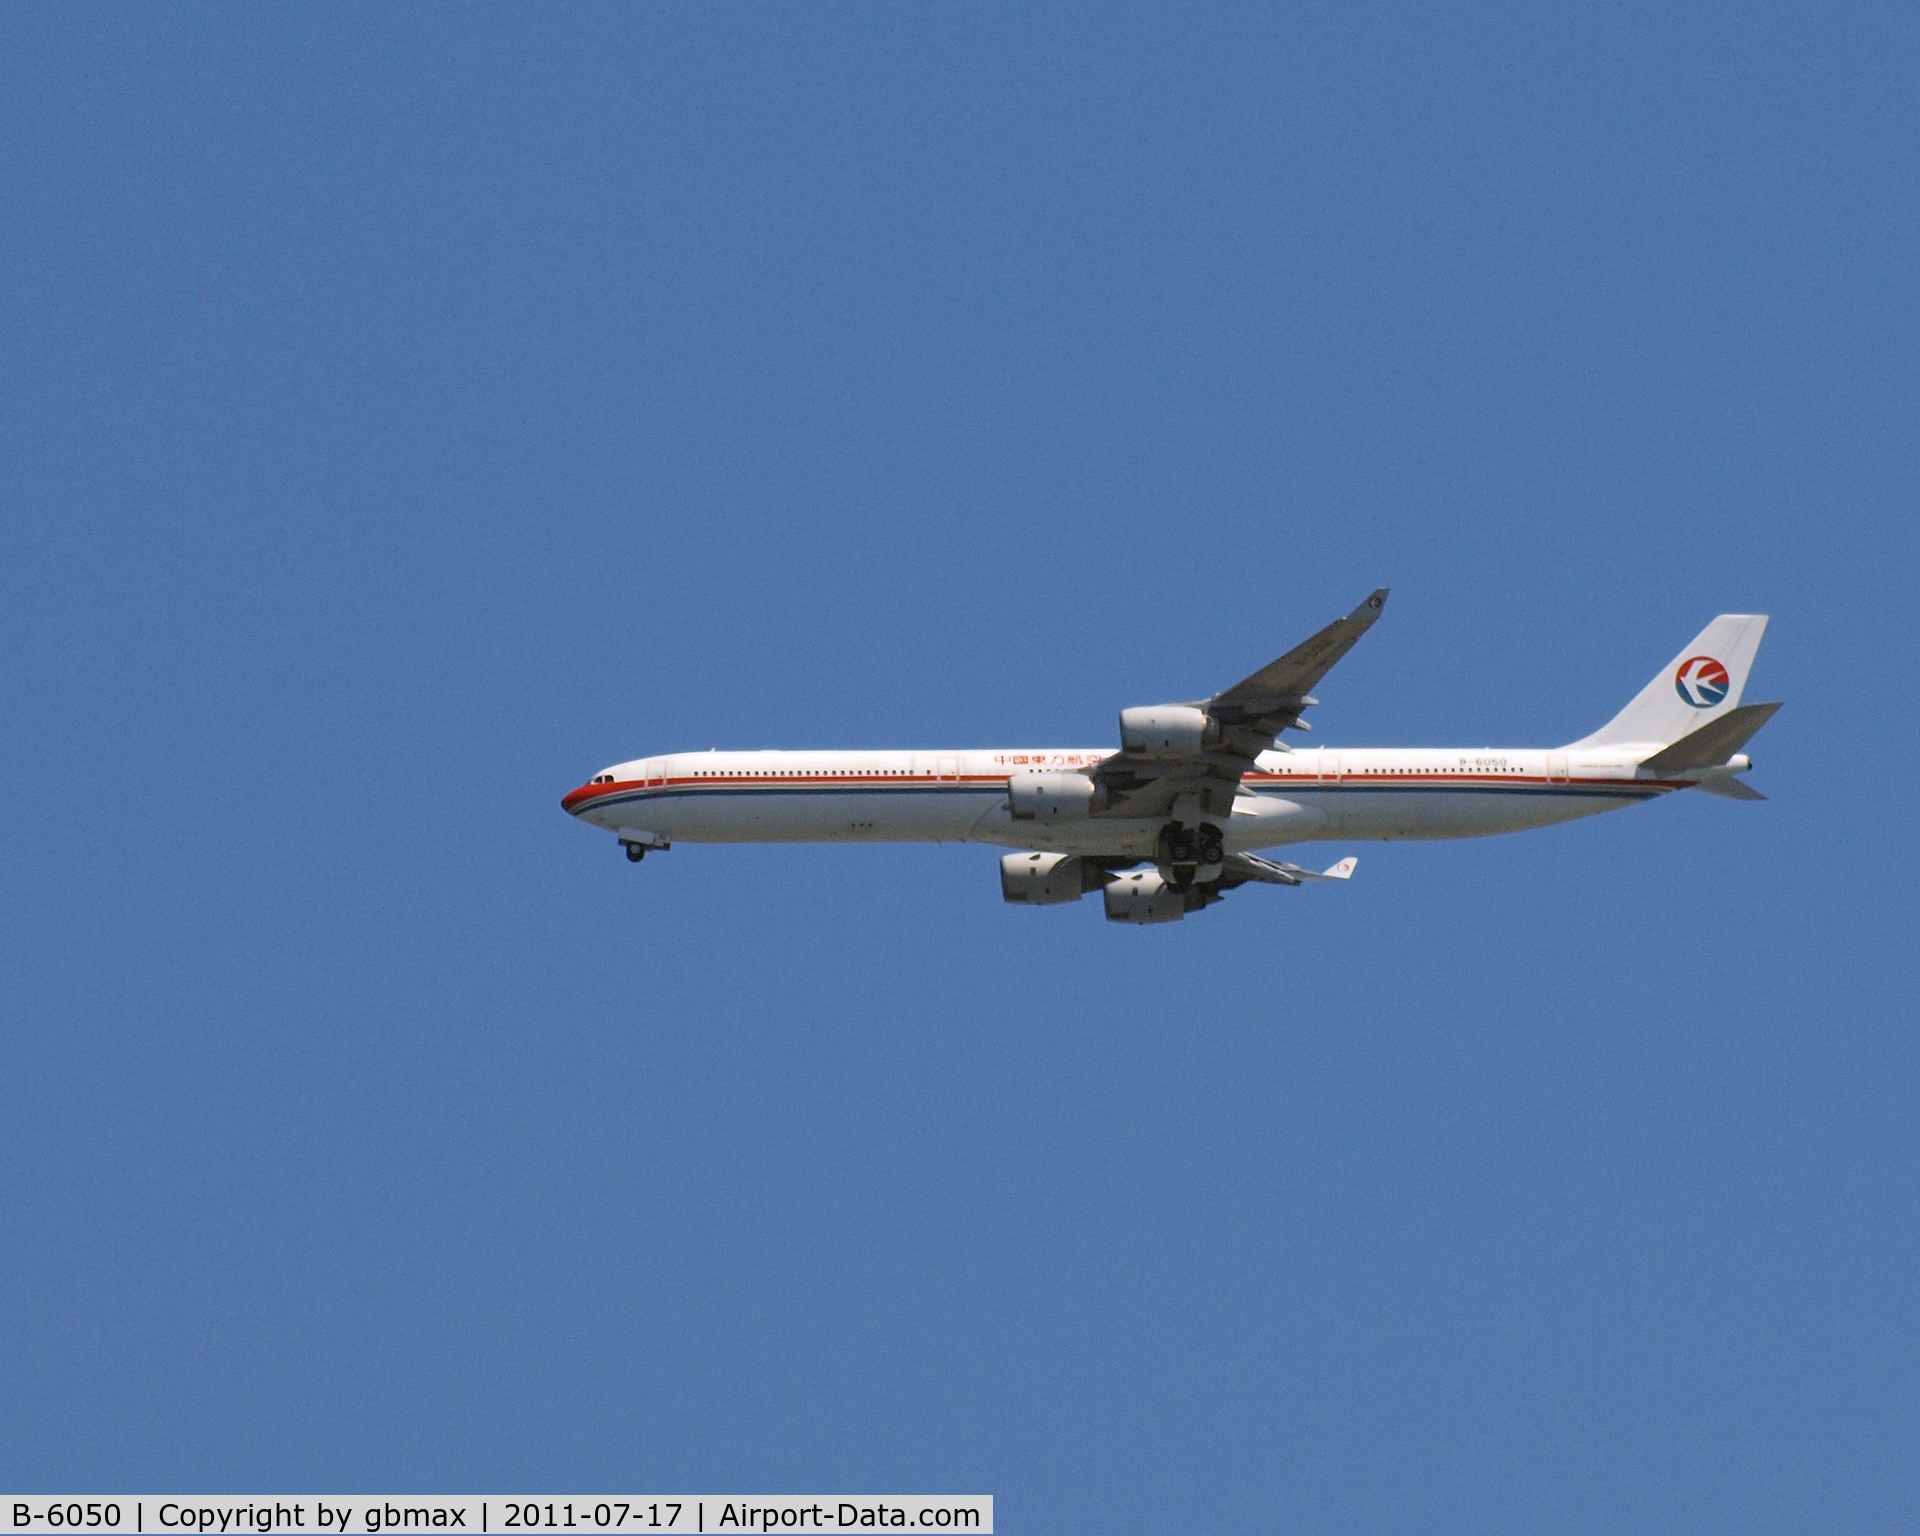 B-6050, 2002 Airbus A340-642 C/N 468, Going to a landing @ JFK, picture taken from Brighton Beach